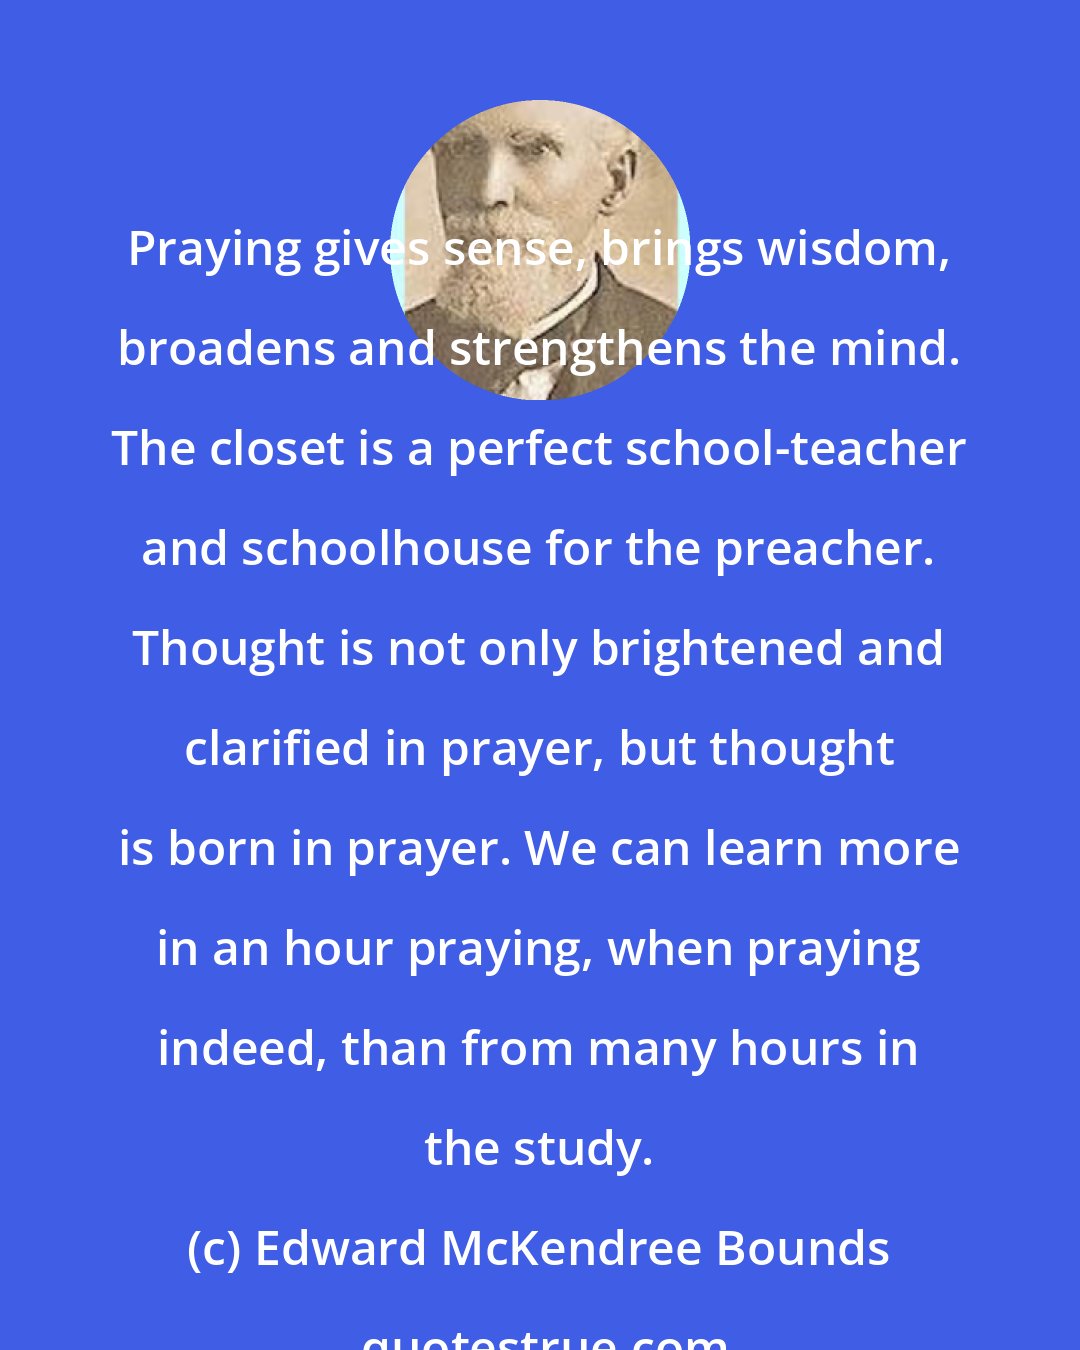 Edward McKendree Bounds: Praying gives sense, brings wisdom, broadens and strengthens the mind. The closet is a perfect school-teacher and schoolhouse for the preacher. Thought is not only brightened and clarified in prayer, but thought is born in prayer. We can learn more in an hour praying, when praying indeed, than from many hours in the study.